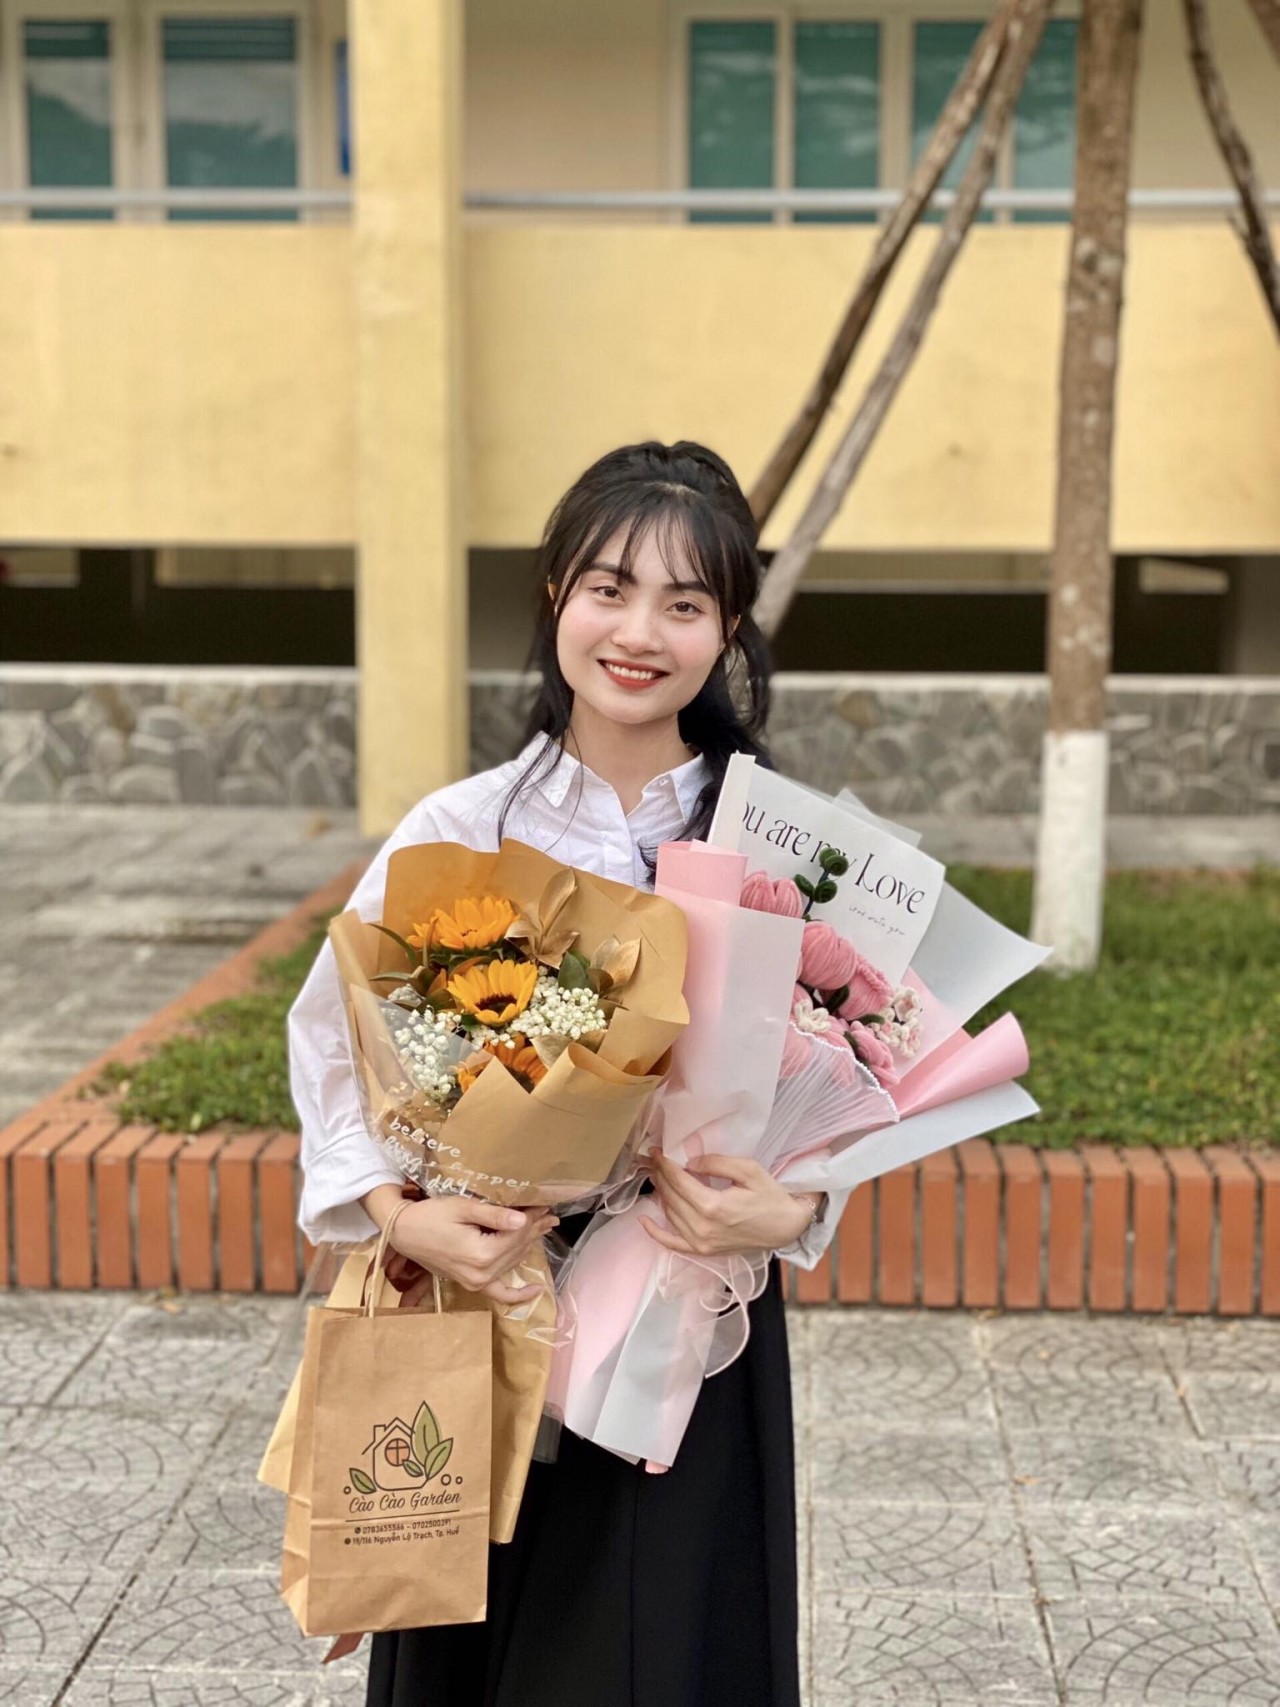 Vietnamese girl Do Thi Hai Yen, who lives in Huong Thuy town, Thua Thien Hue province, has studied hard to overcome difficulties with the support of her Taiwanese adoptive parents and the Zhi Shan Foundation, as well as her own determination.